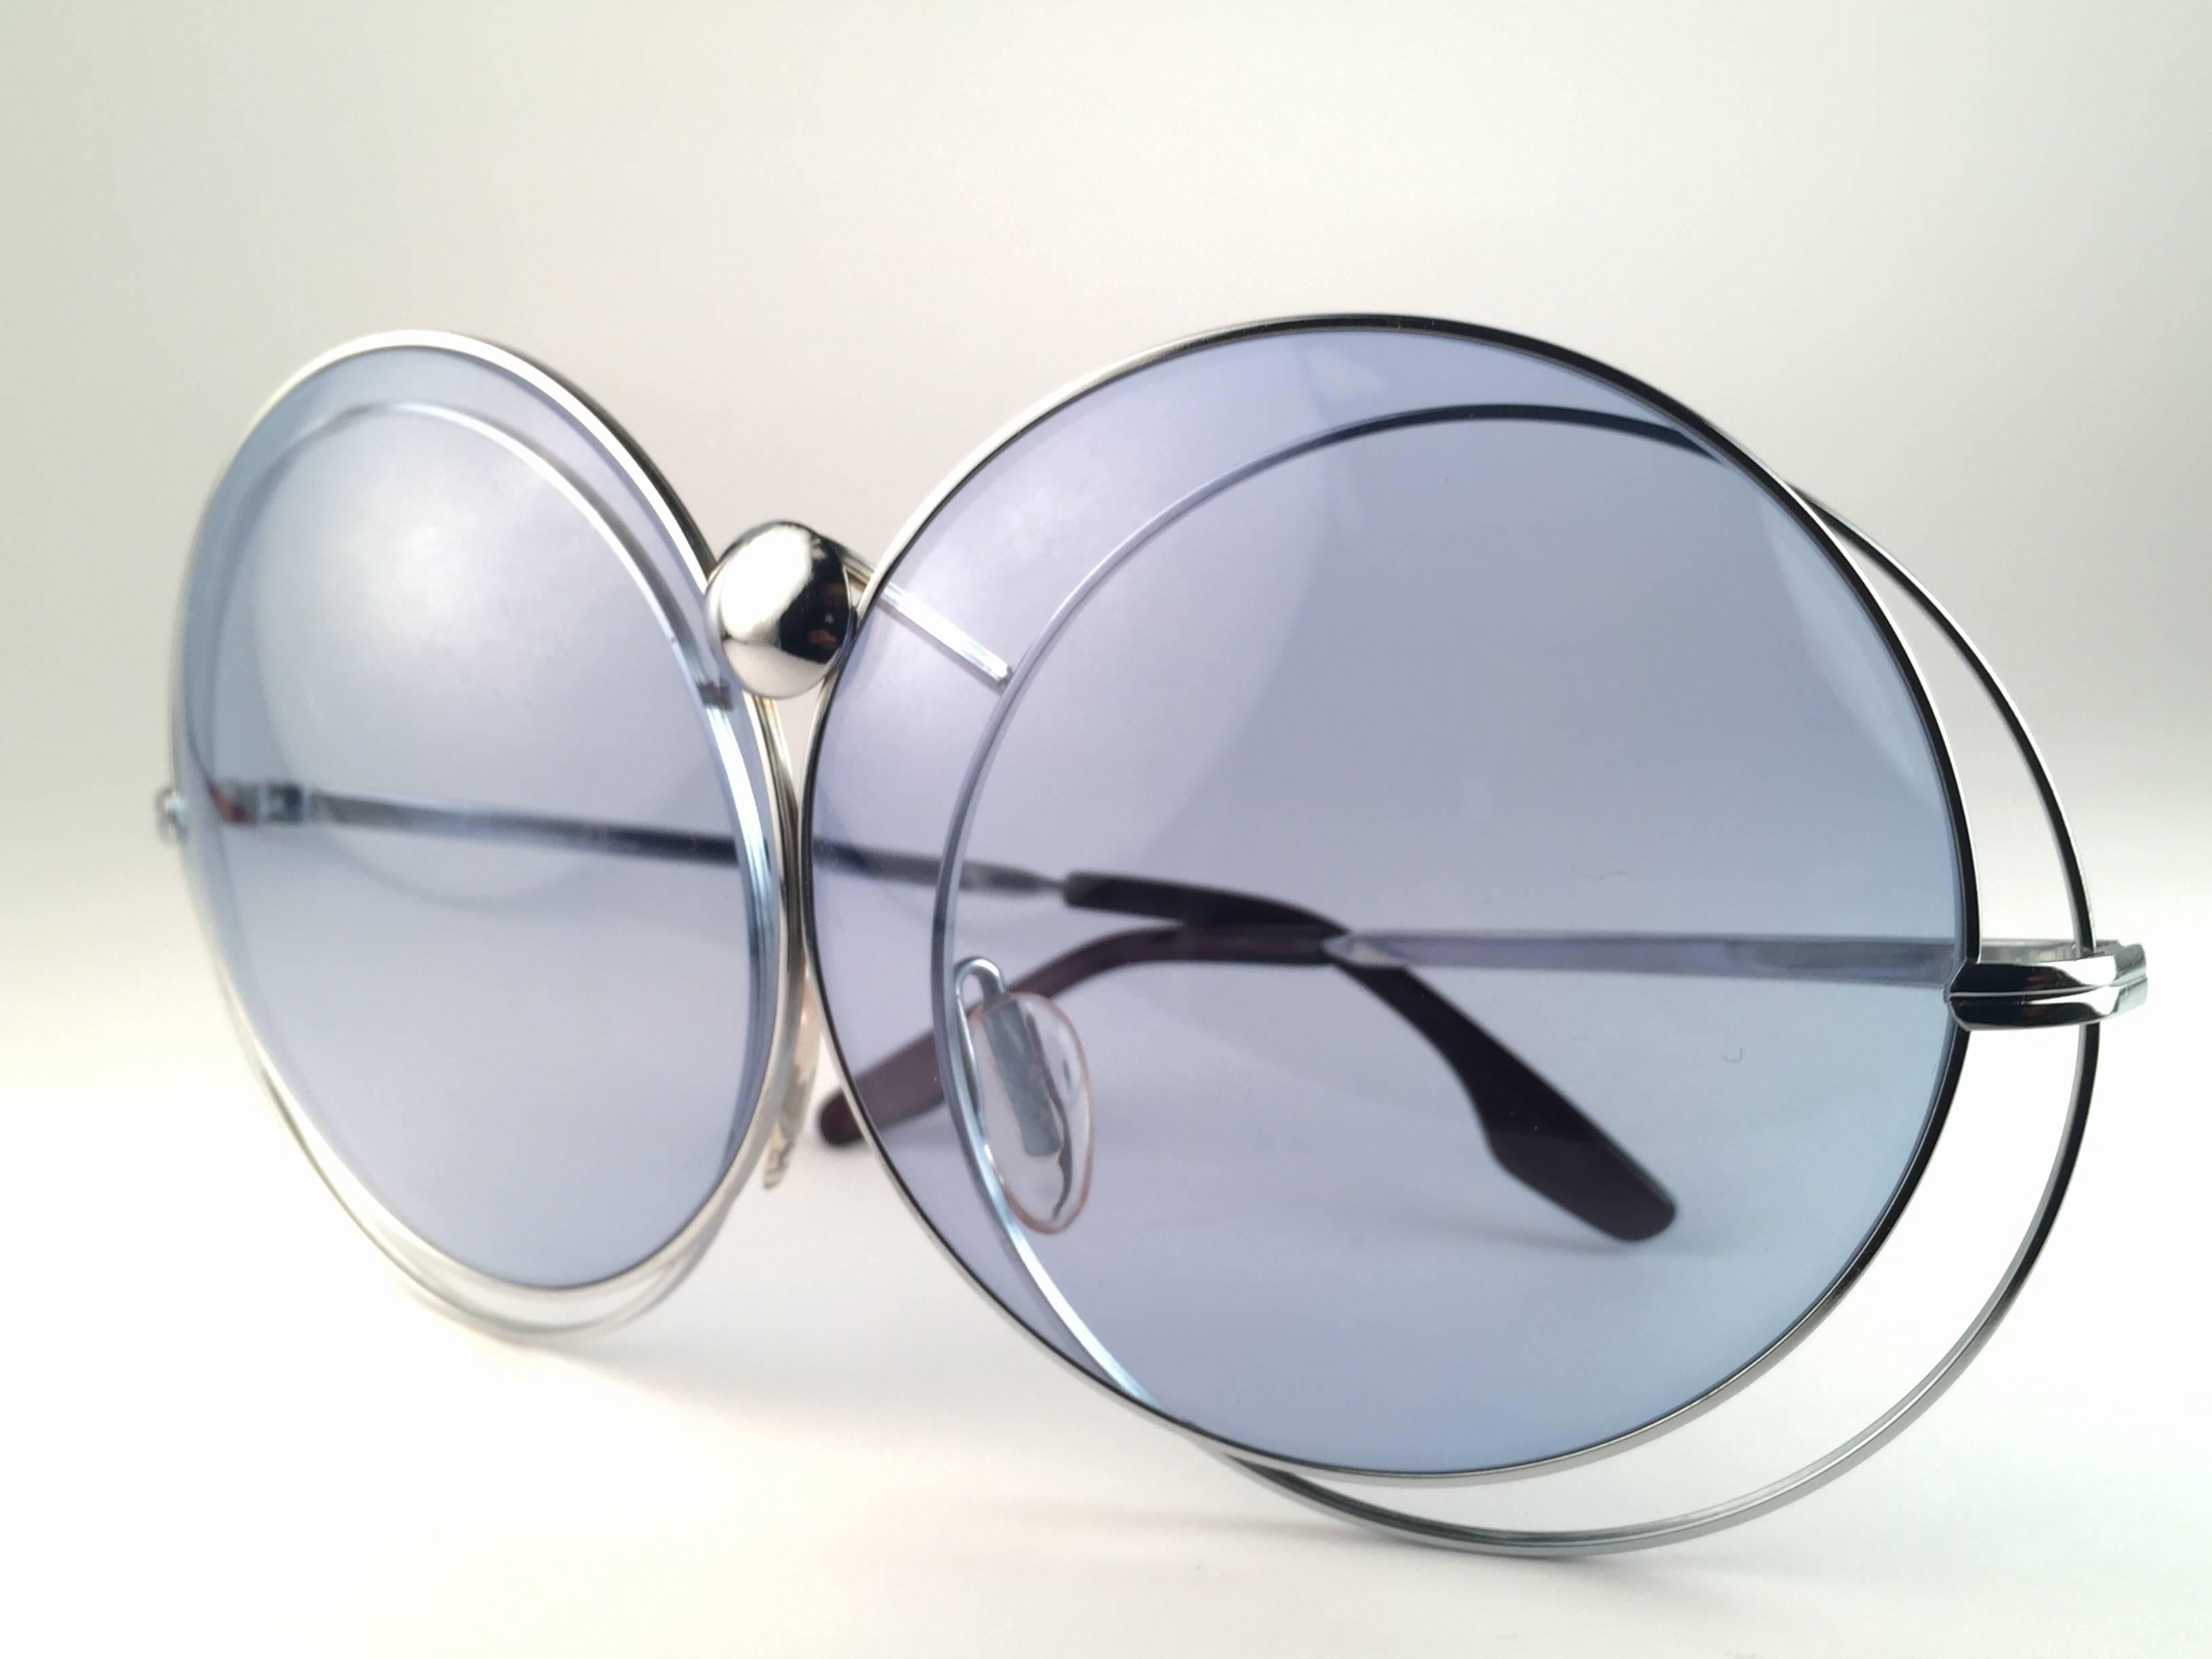 Purple New Rare Vintage Christian Dior Oversized Silver Metal Round Sunglasses 1970's For Sale